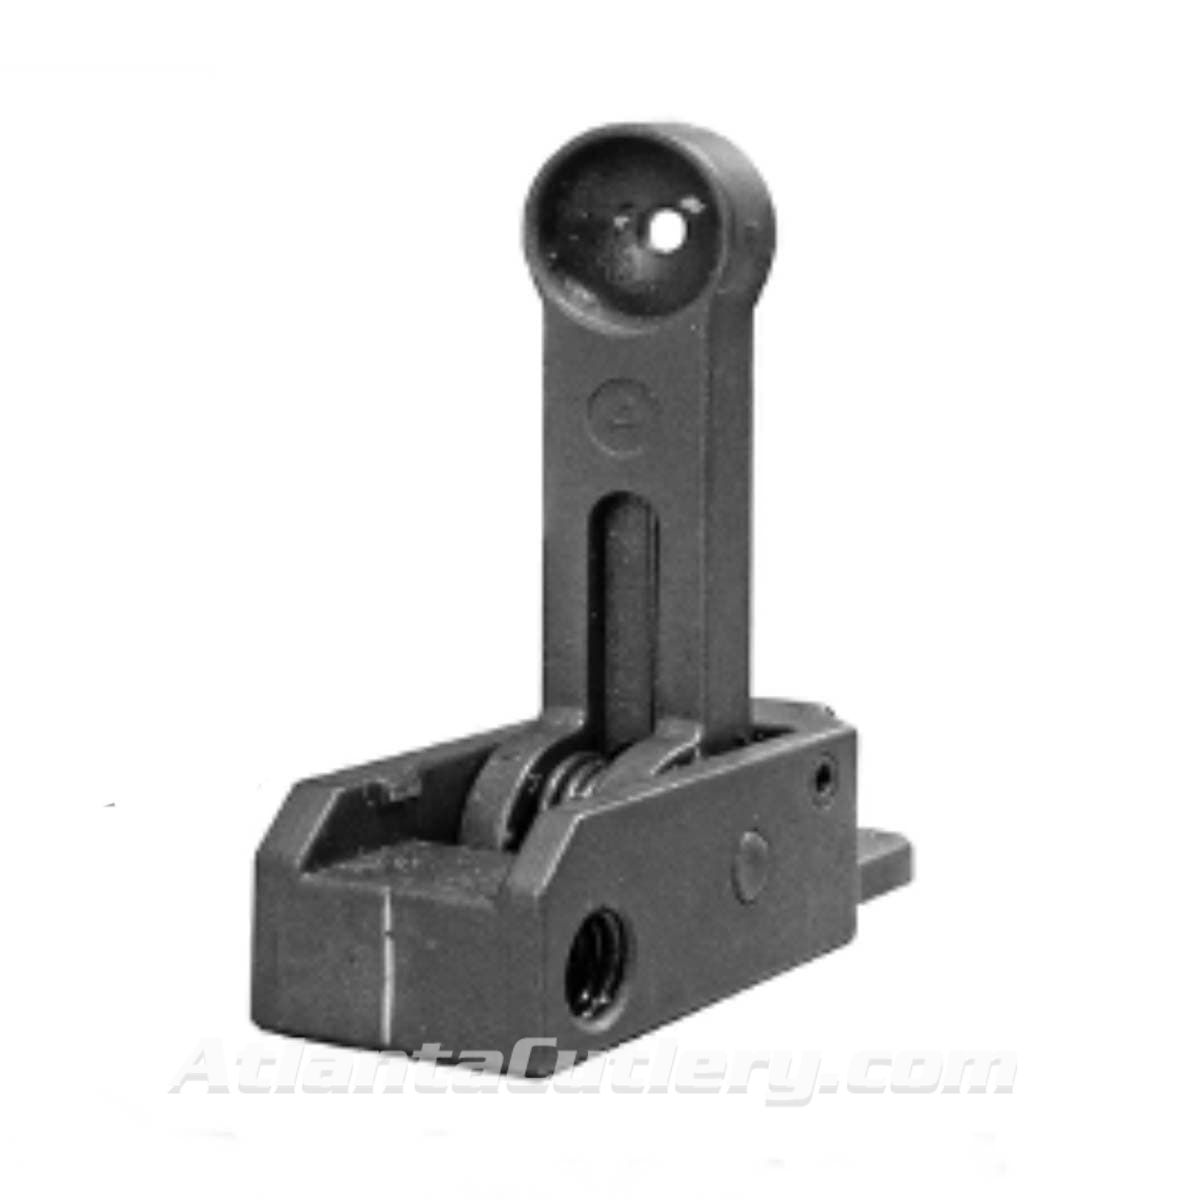 M4/M16 Replacement Rear Aperture Assembly for the U.S. Army M4 series of rifles